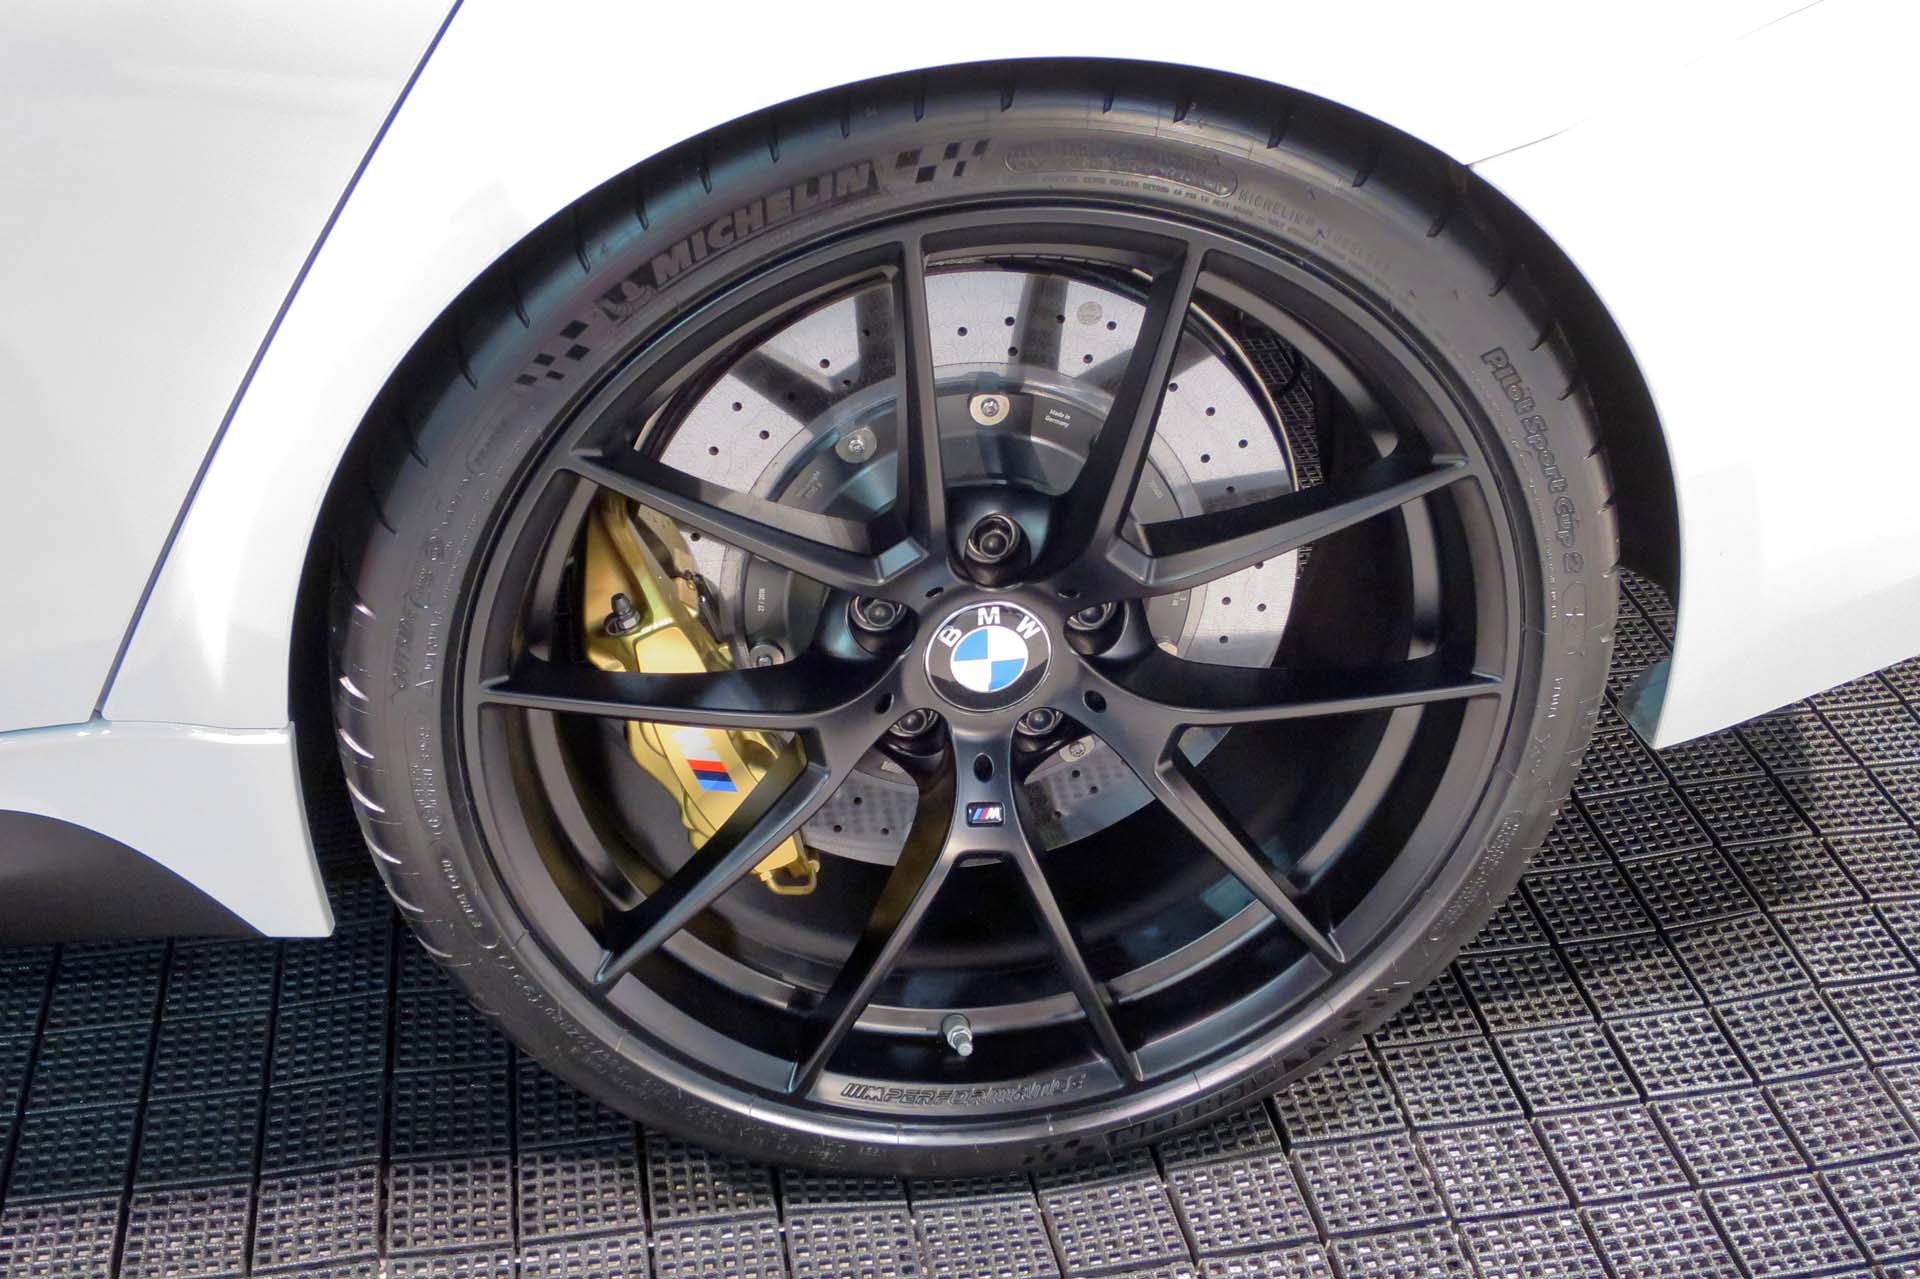 BMW offers new lightweight carbon fibre wheels for its M performance editions.